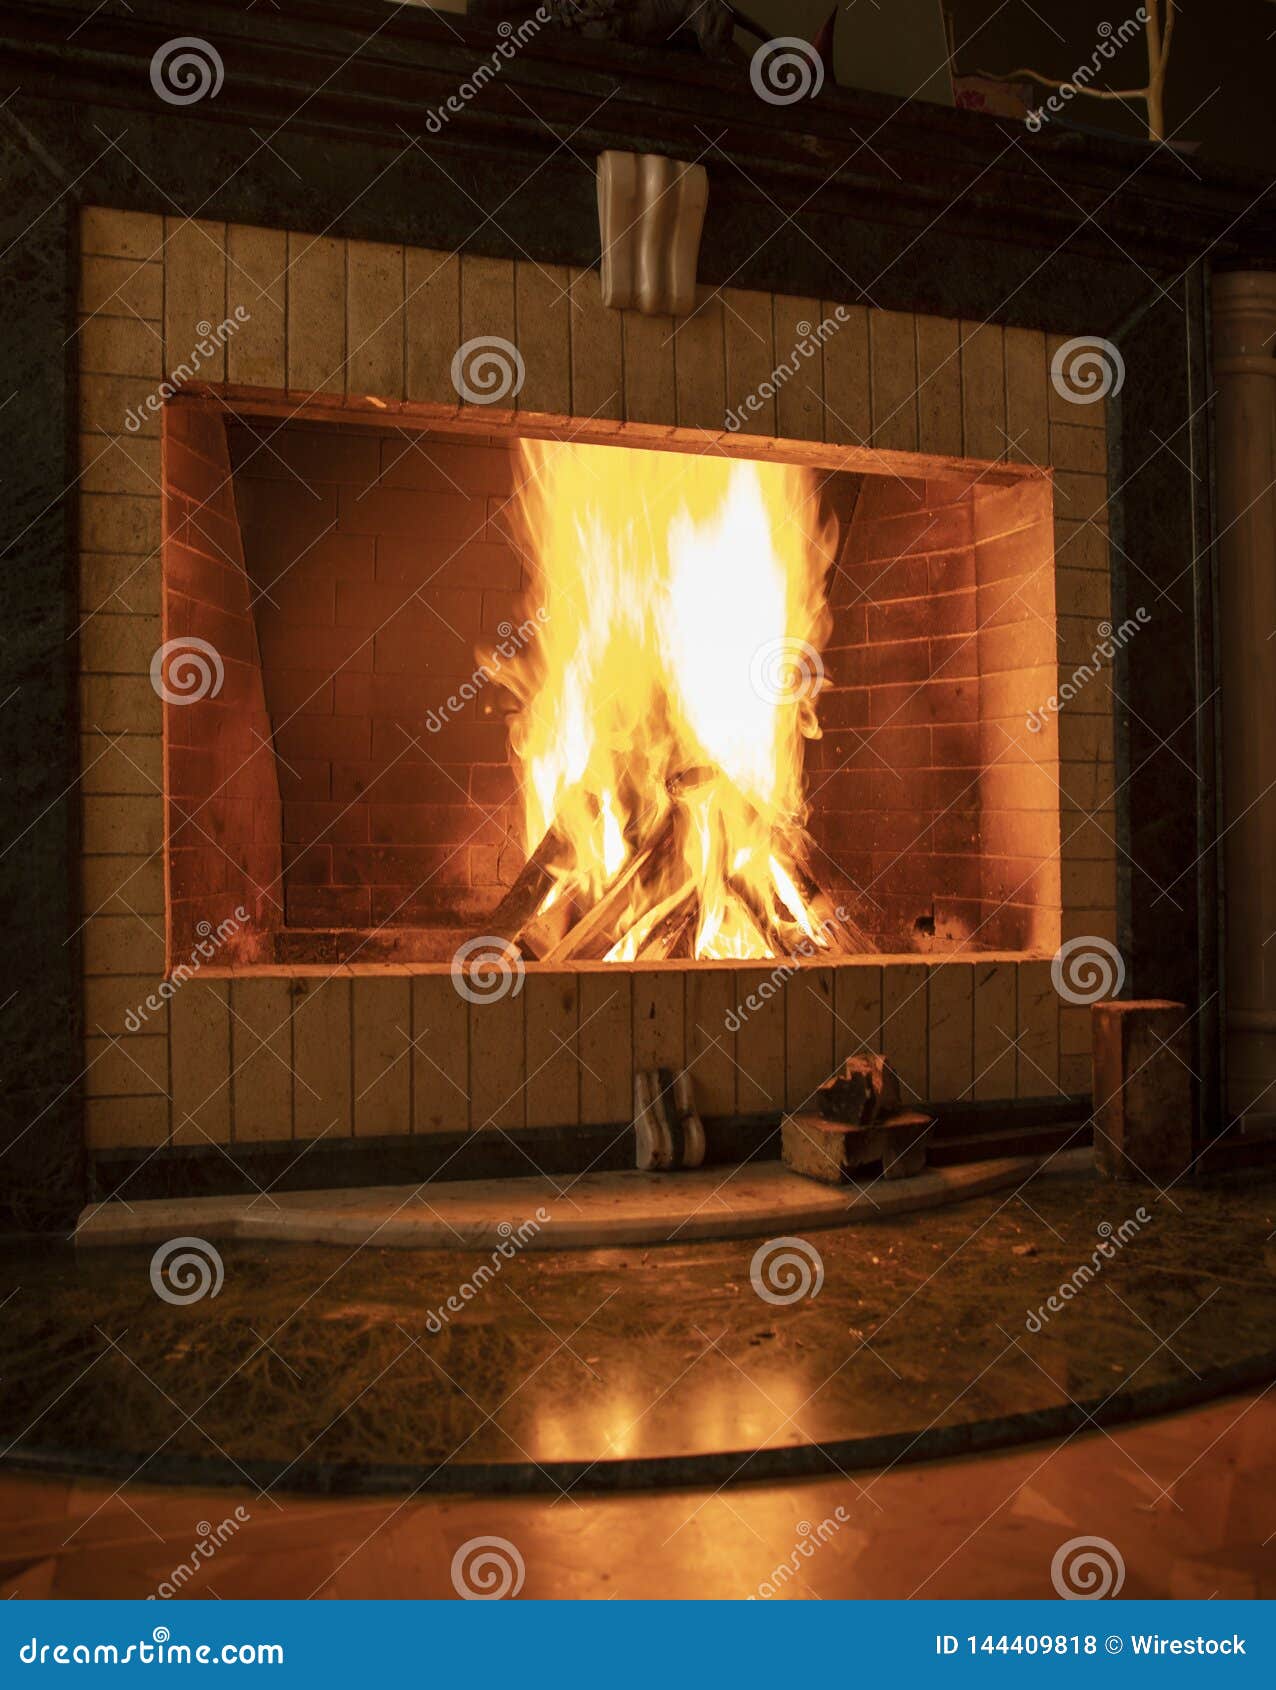 Fireplace in a fancy house stock photo. Image of cozy ...